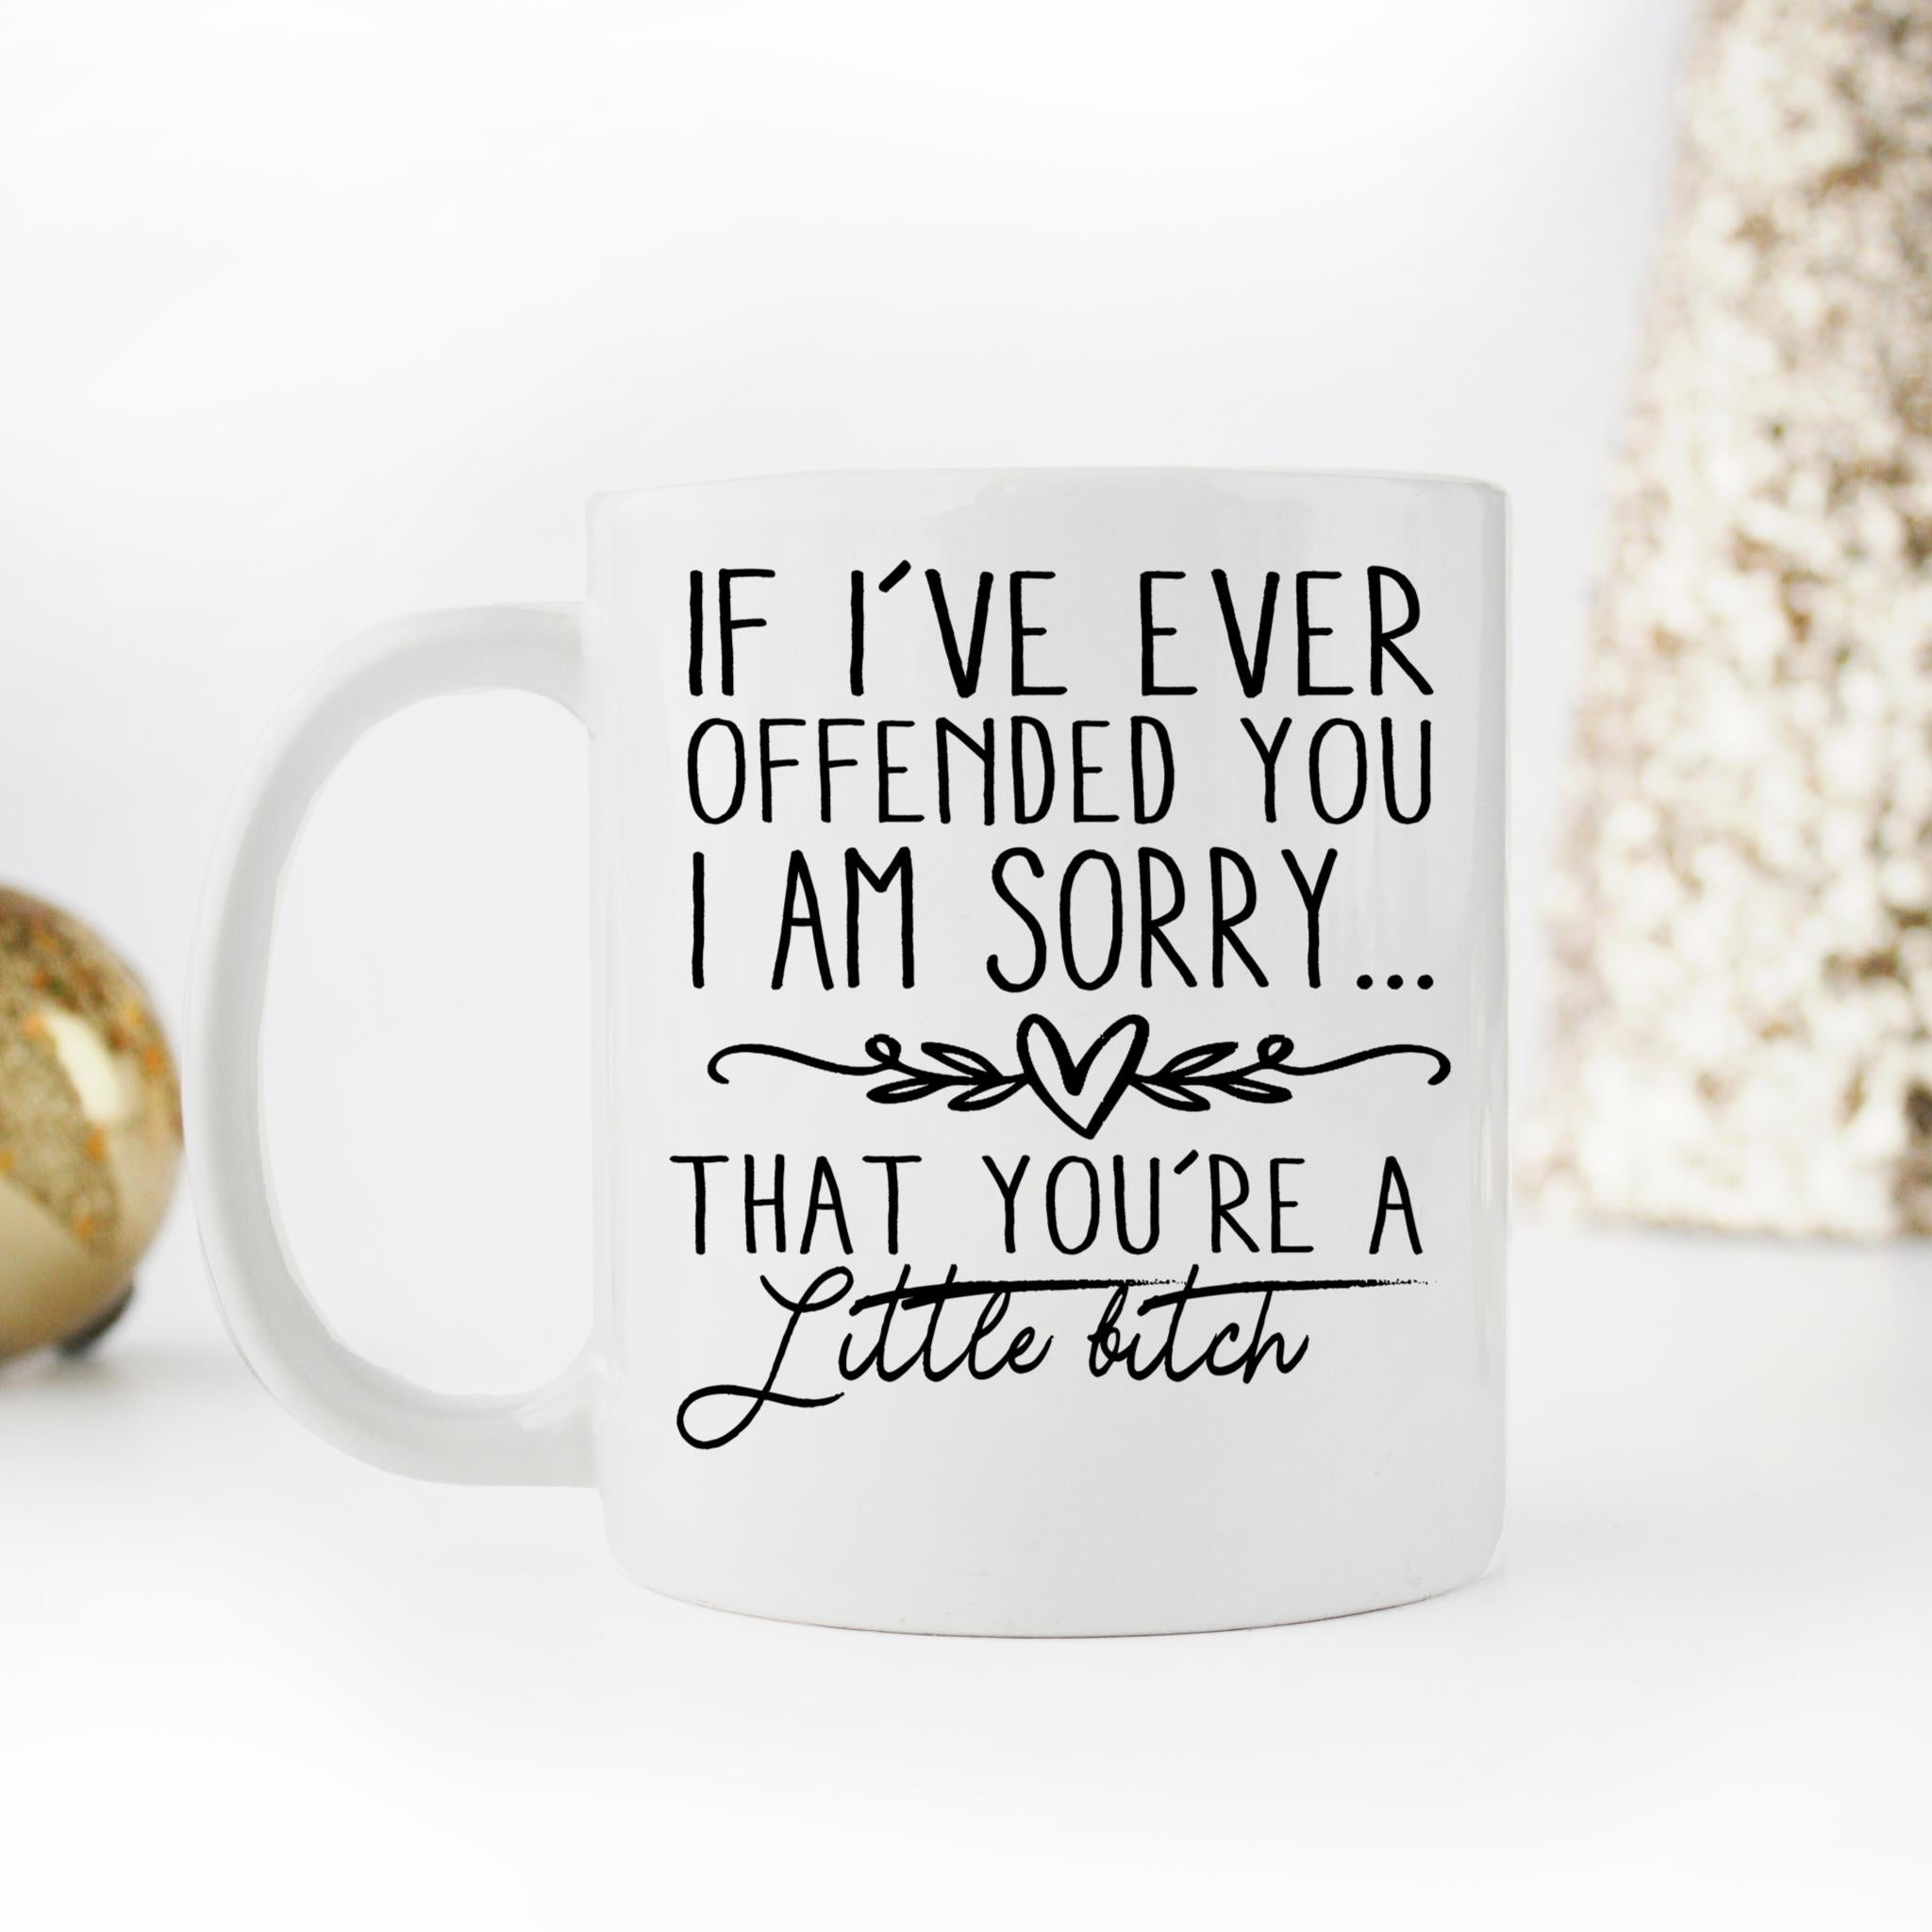 Skitongifts Coffee Mug Funny Ceramic Novelty If I've Ever Offended You I'm Sorry. That You're A Little Bitch JHXZZ0X